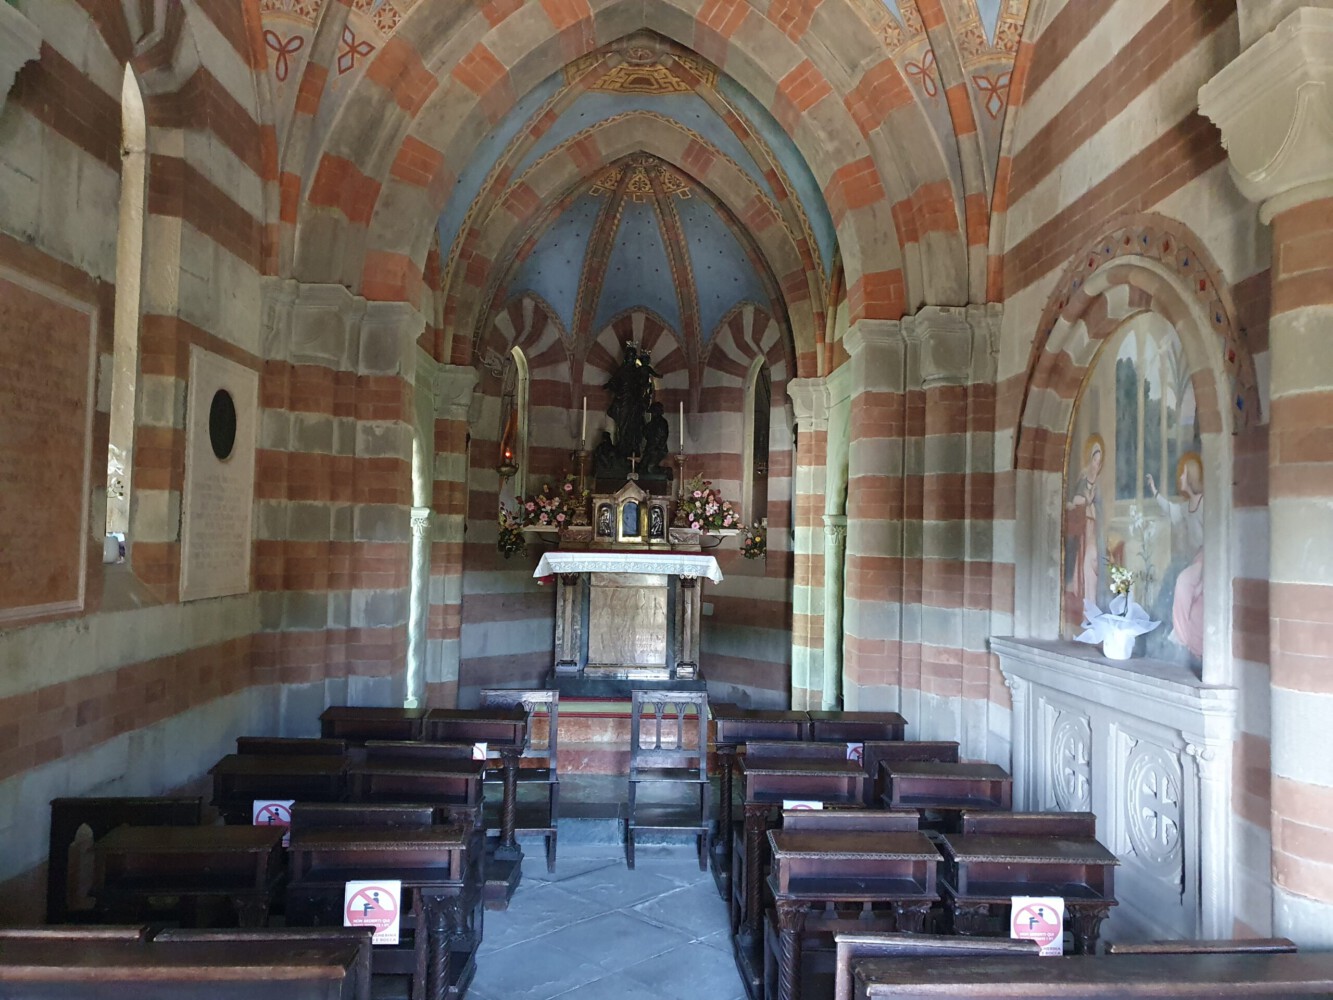 Inside the church on the pass.